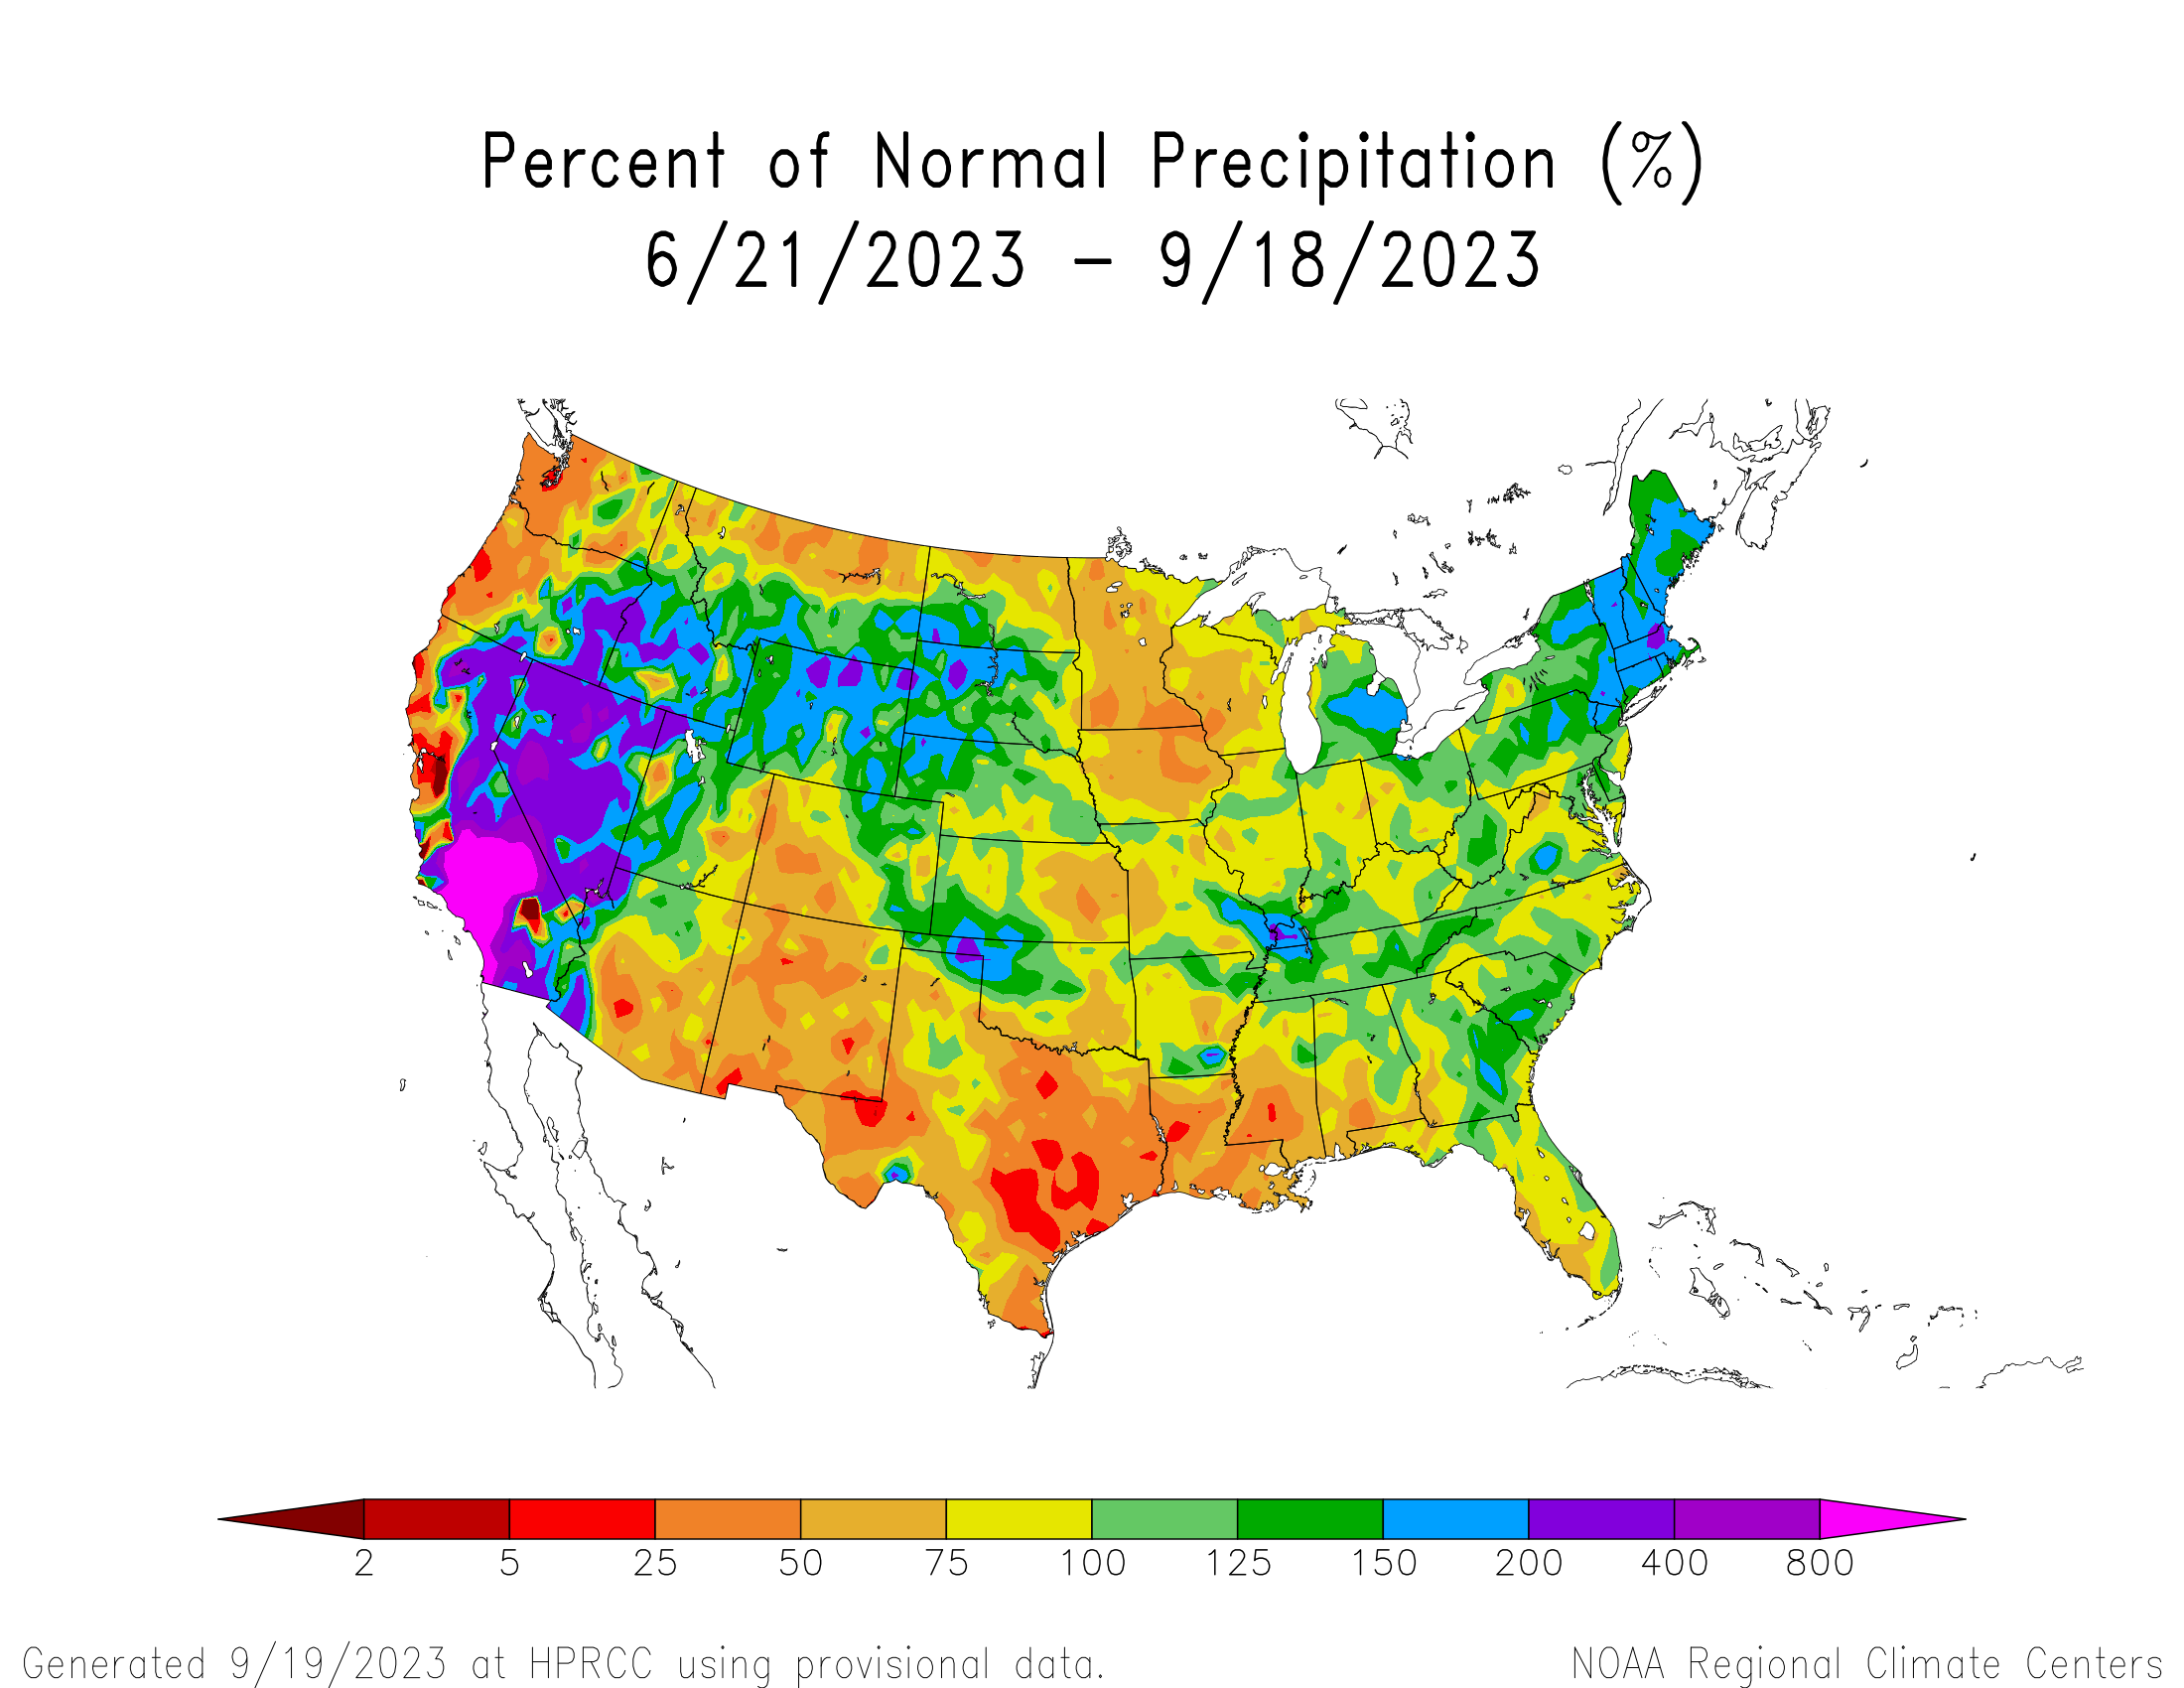 Percent of normal precipitation for the contiguous United States for June 21, 2023 to September 18, 2023.